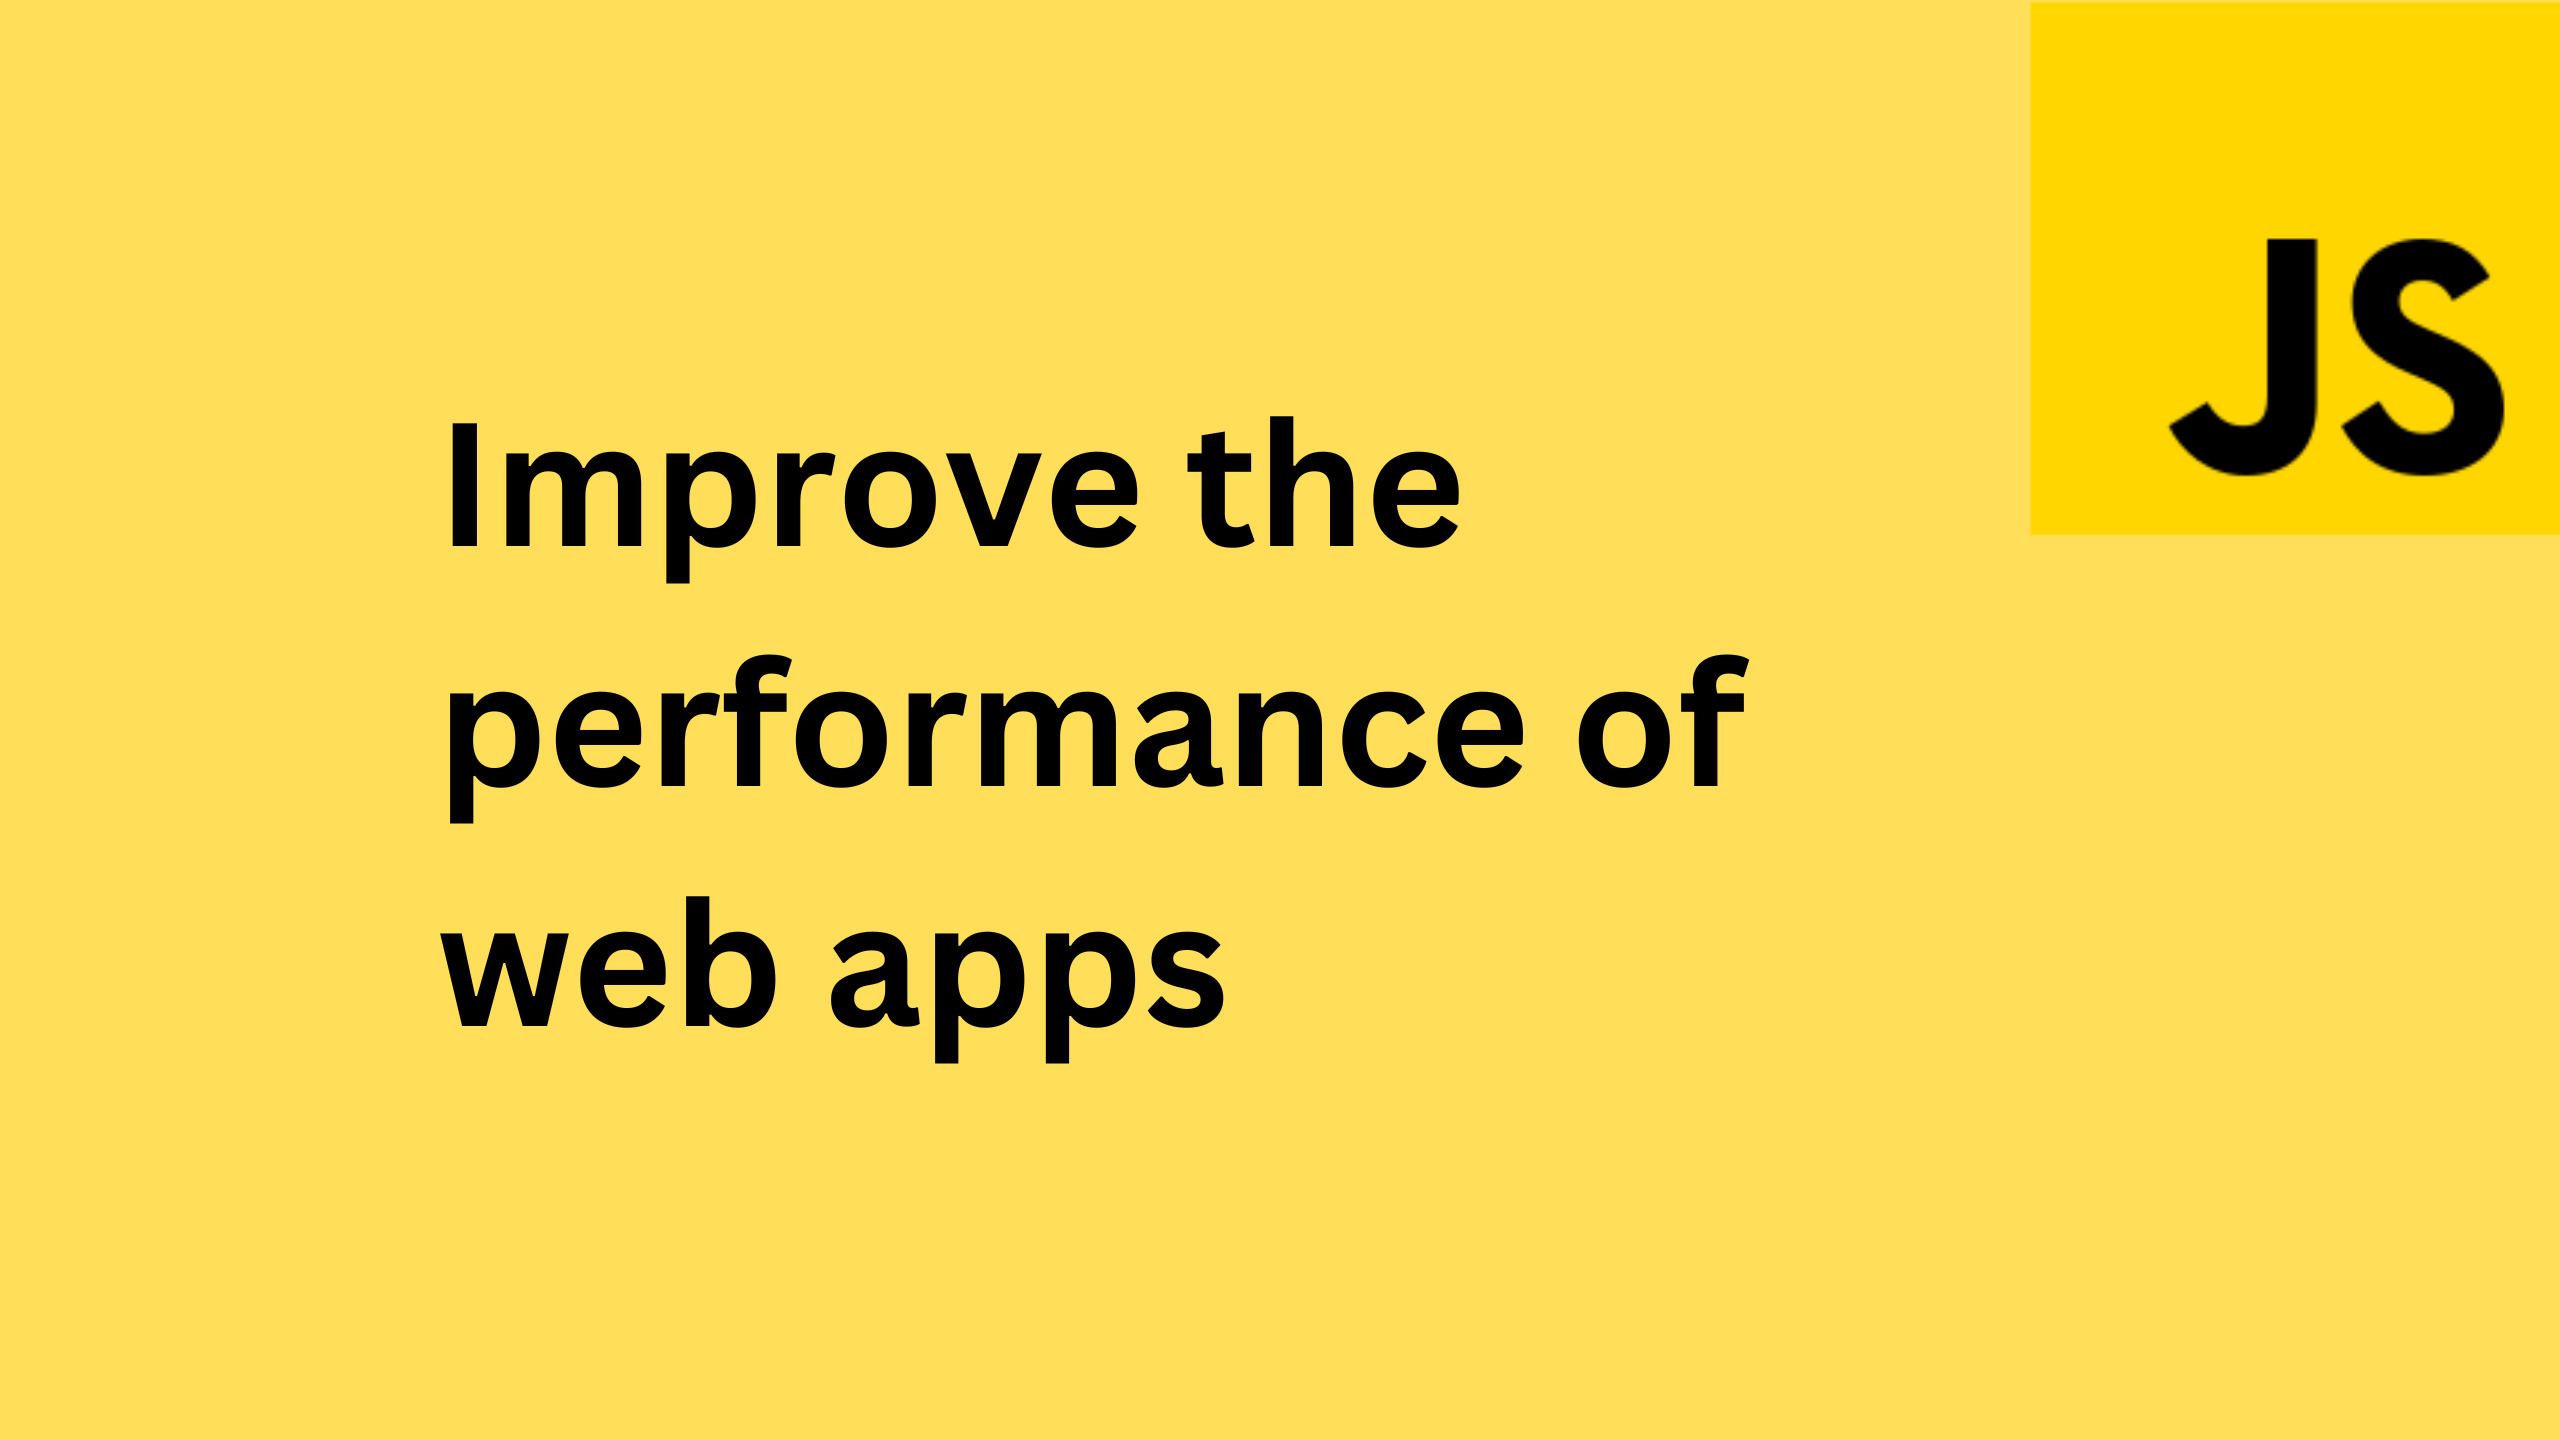 Top 7 ways to improve the performance of web apps